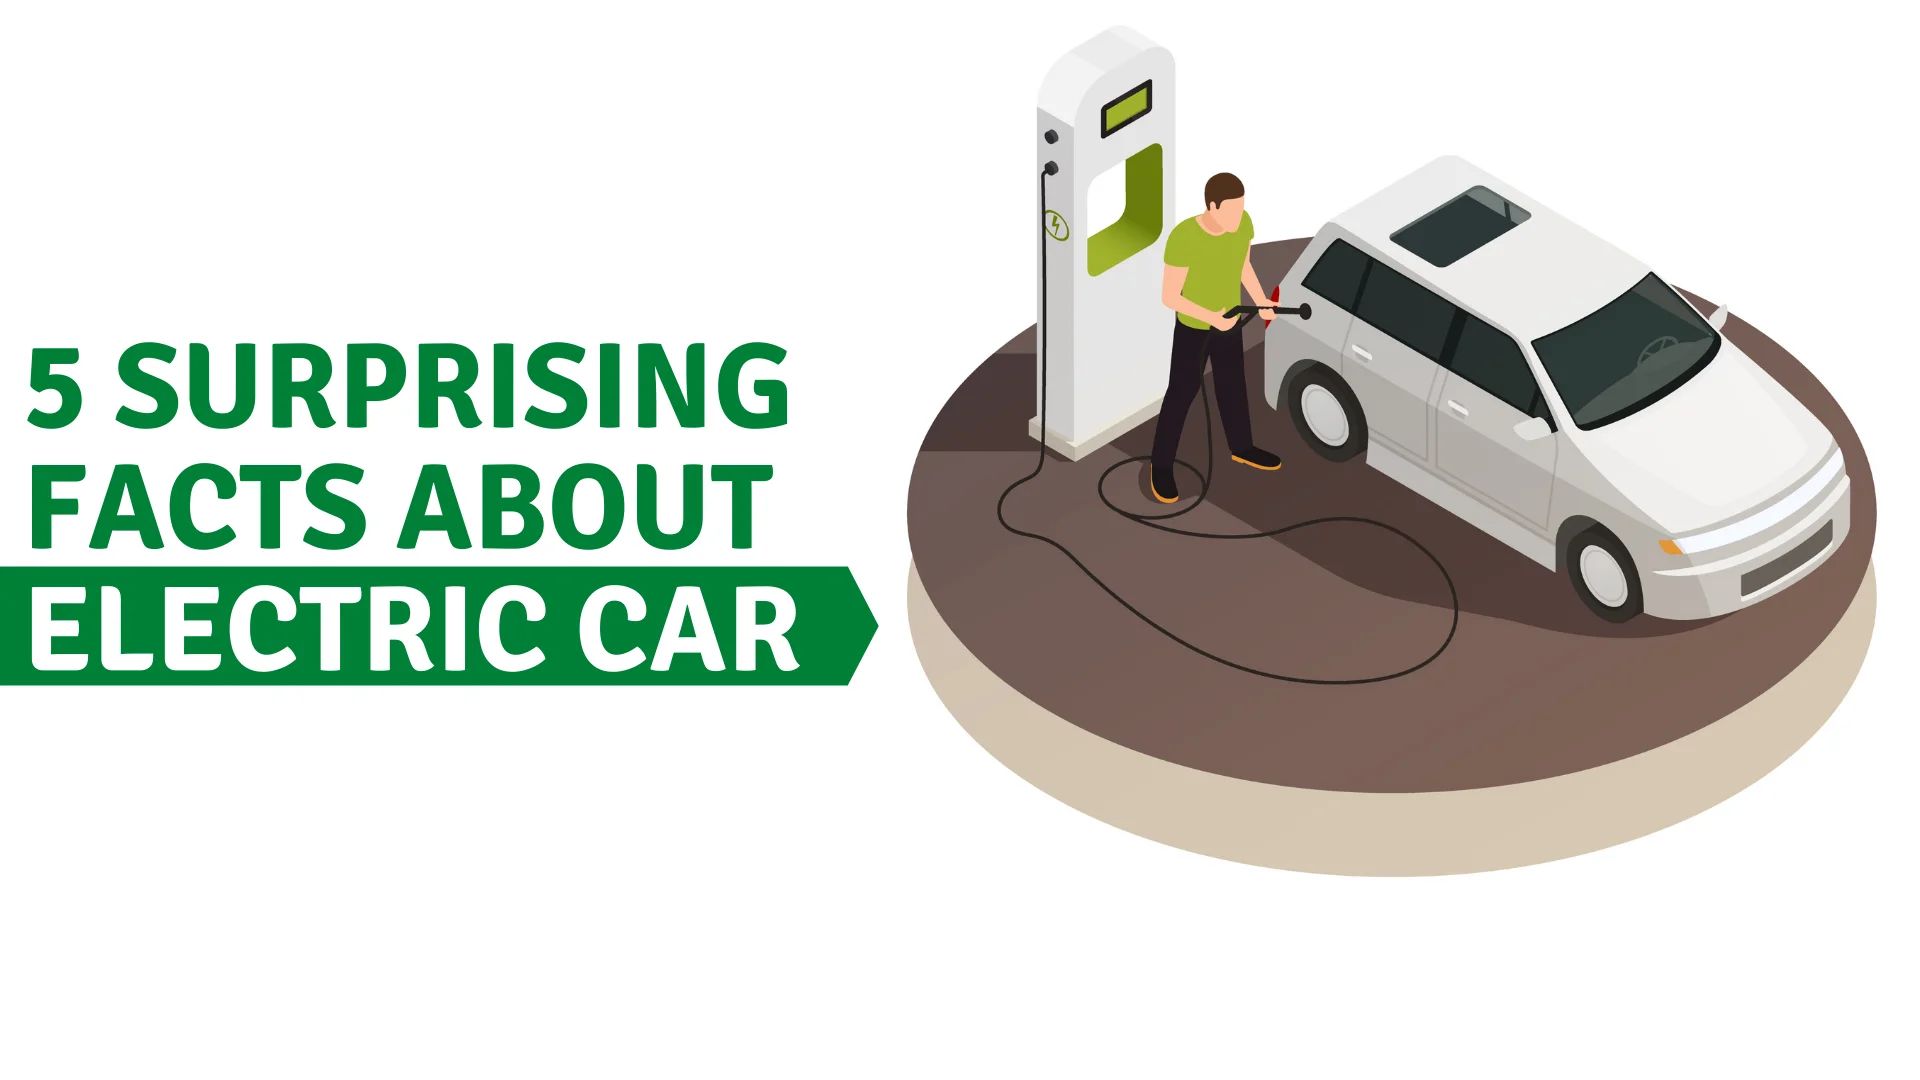 https://e-vehicleinfo.com/5-surprising-facts-about-electric-cars-electric-mobility/